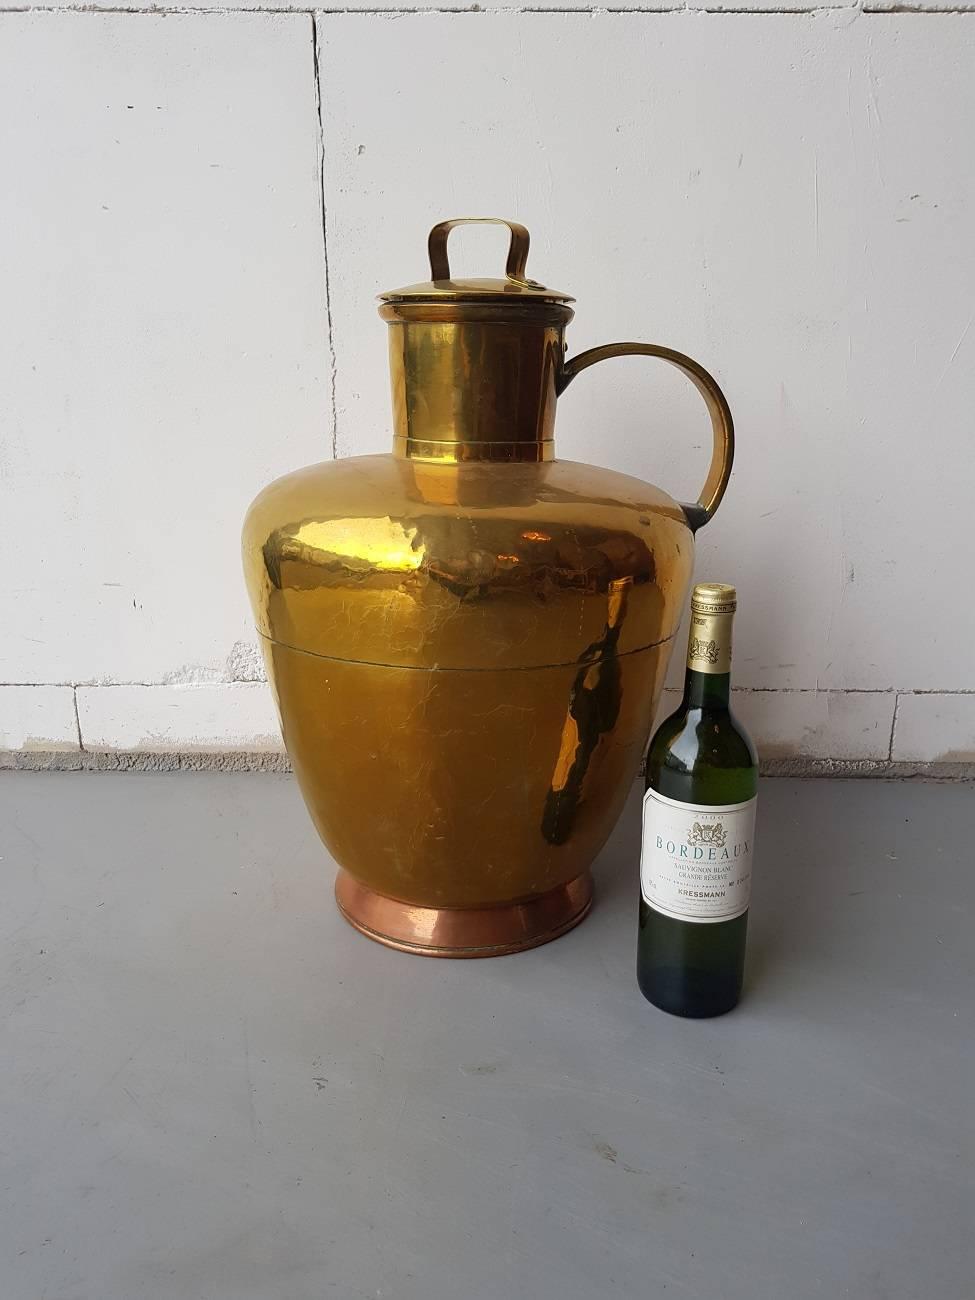 Large and decorative 19th century Dutch copper and brass milk can.

The measurements are,
Depth 35 cm/ 13.7 inch.
Width 35 cm/ 13.7 inch.
Height 53 cm/ 20.8 inch.
   